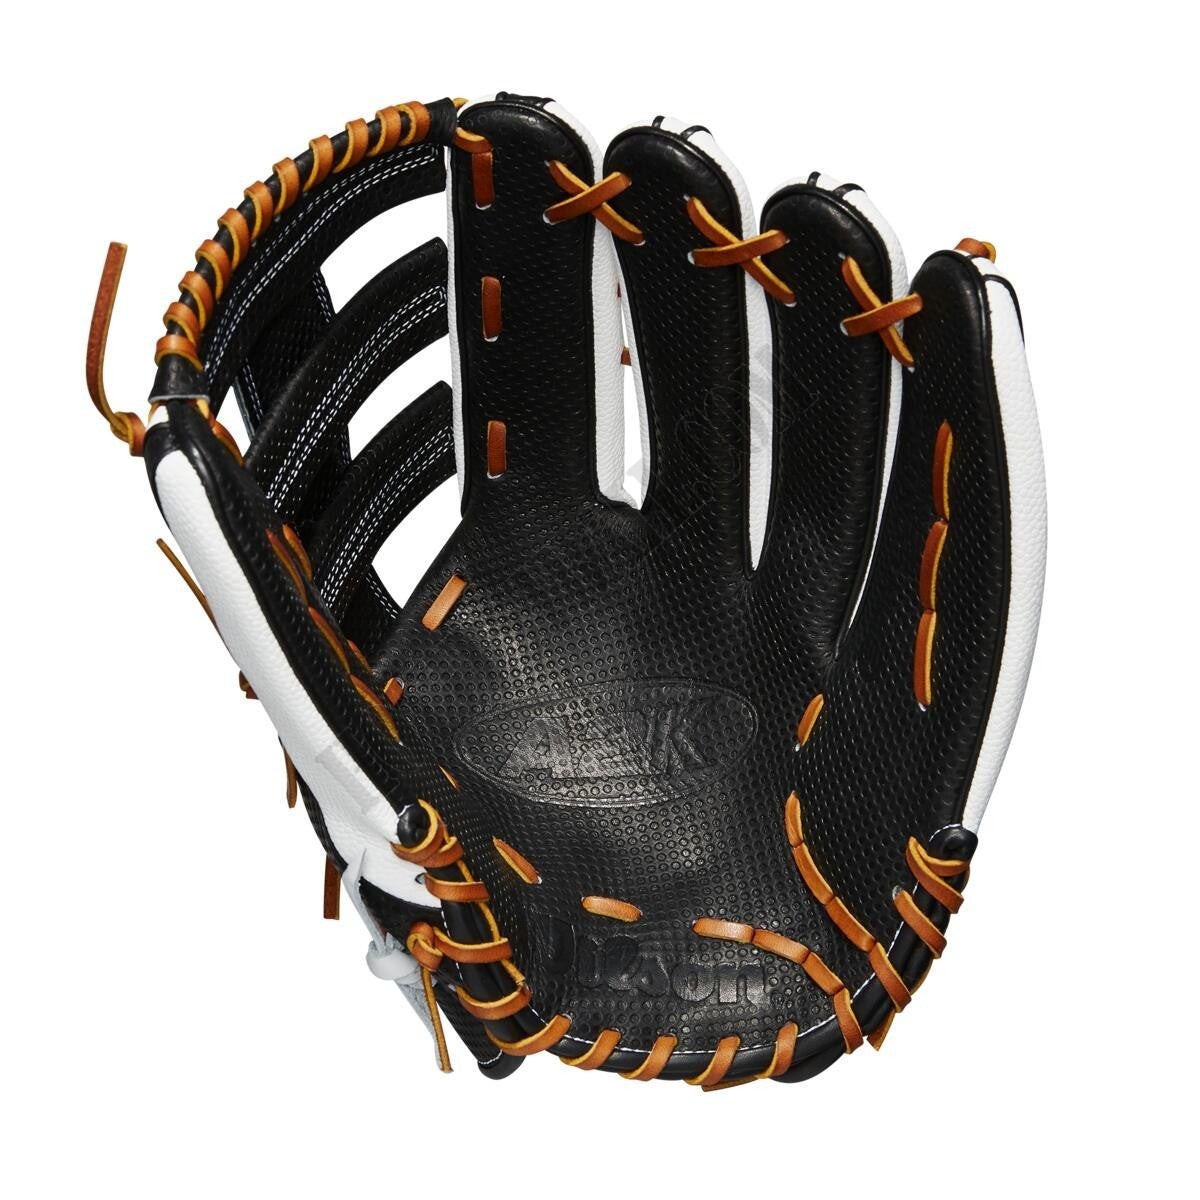 2021 A2K SC1775SS 12.75" Outfield Baseball Glove - Limited Edition ● Wilson Promotions - -2